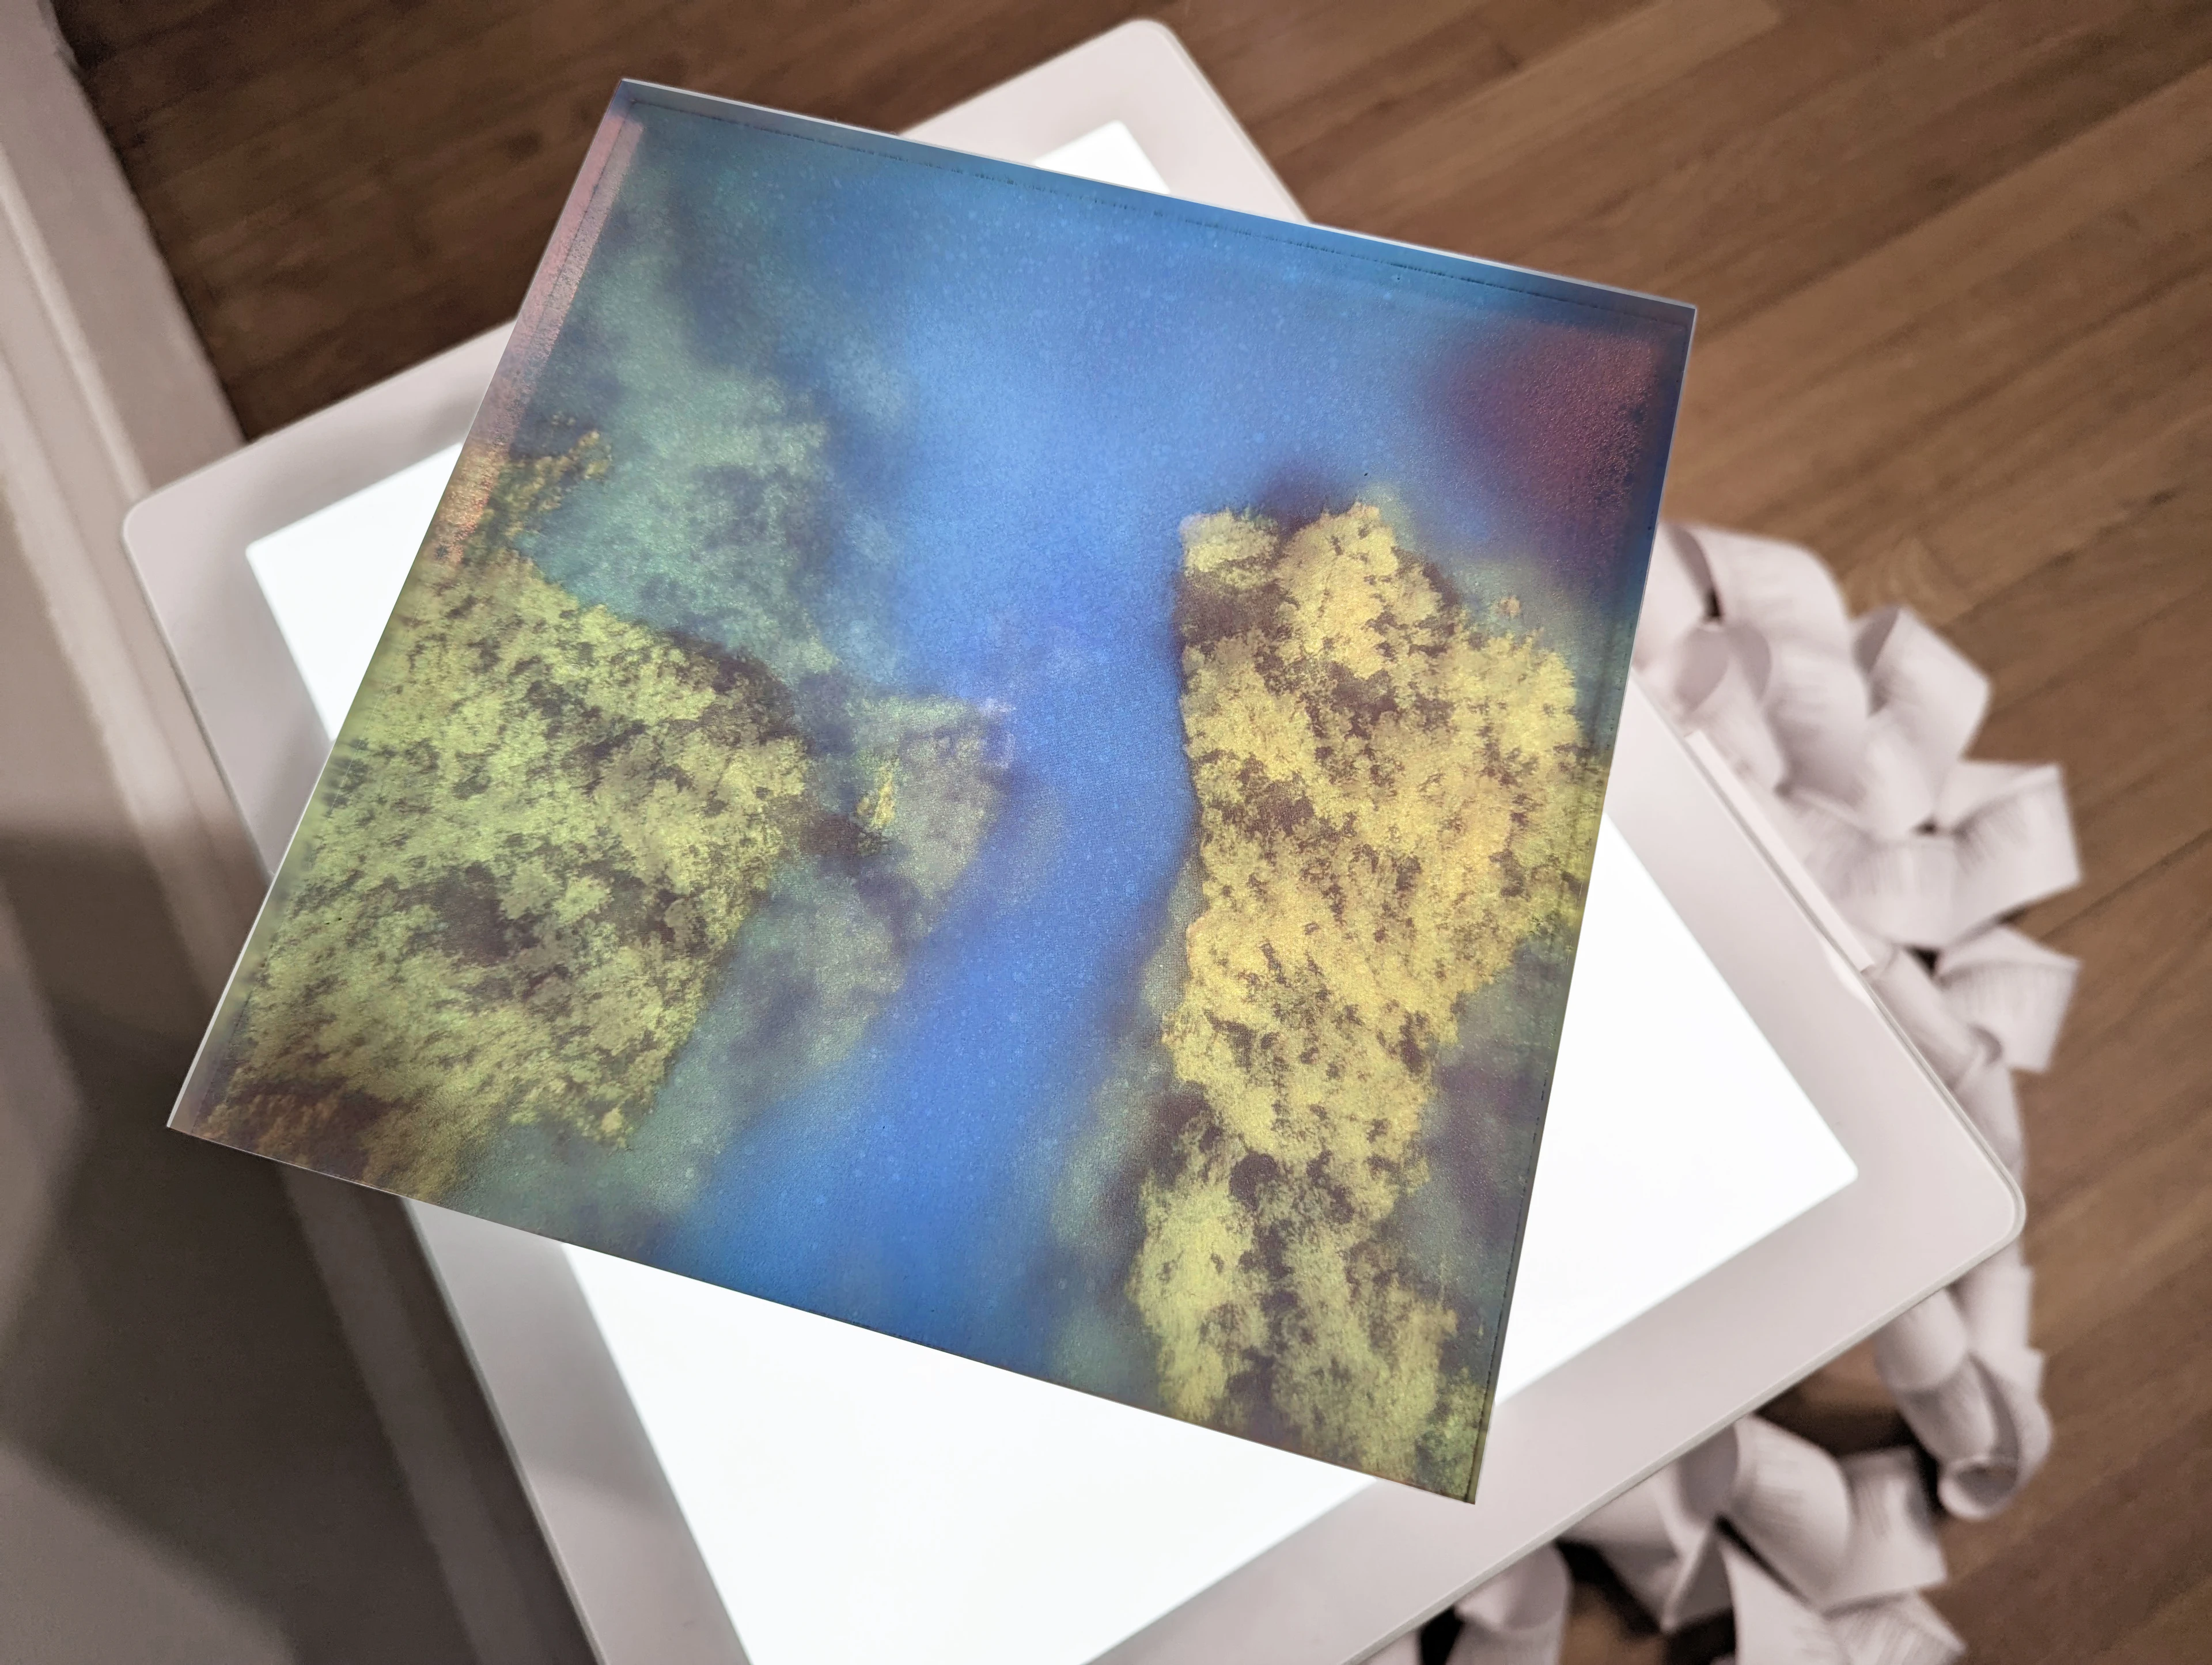 Translucent layers from a vector through high-dimensional space depict ghostly aerial imagery.